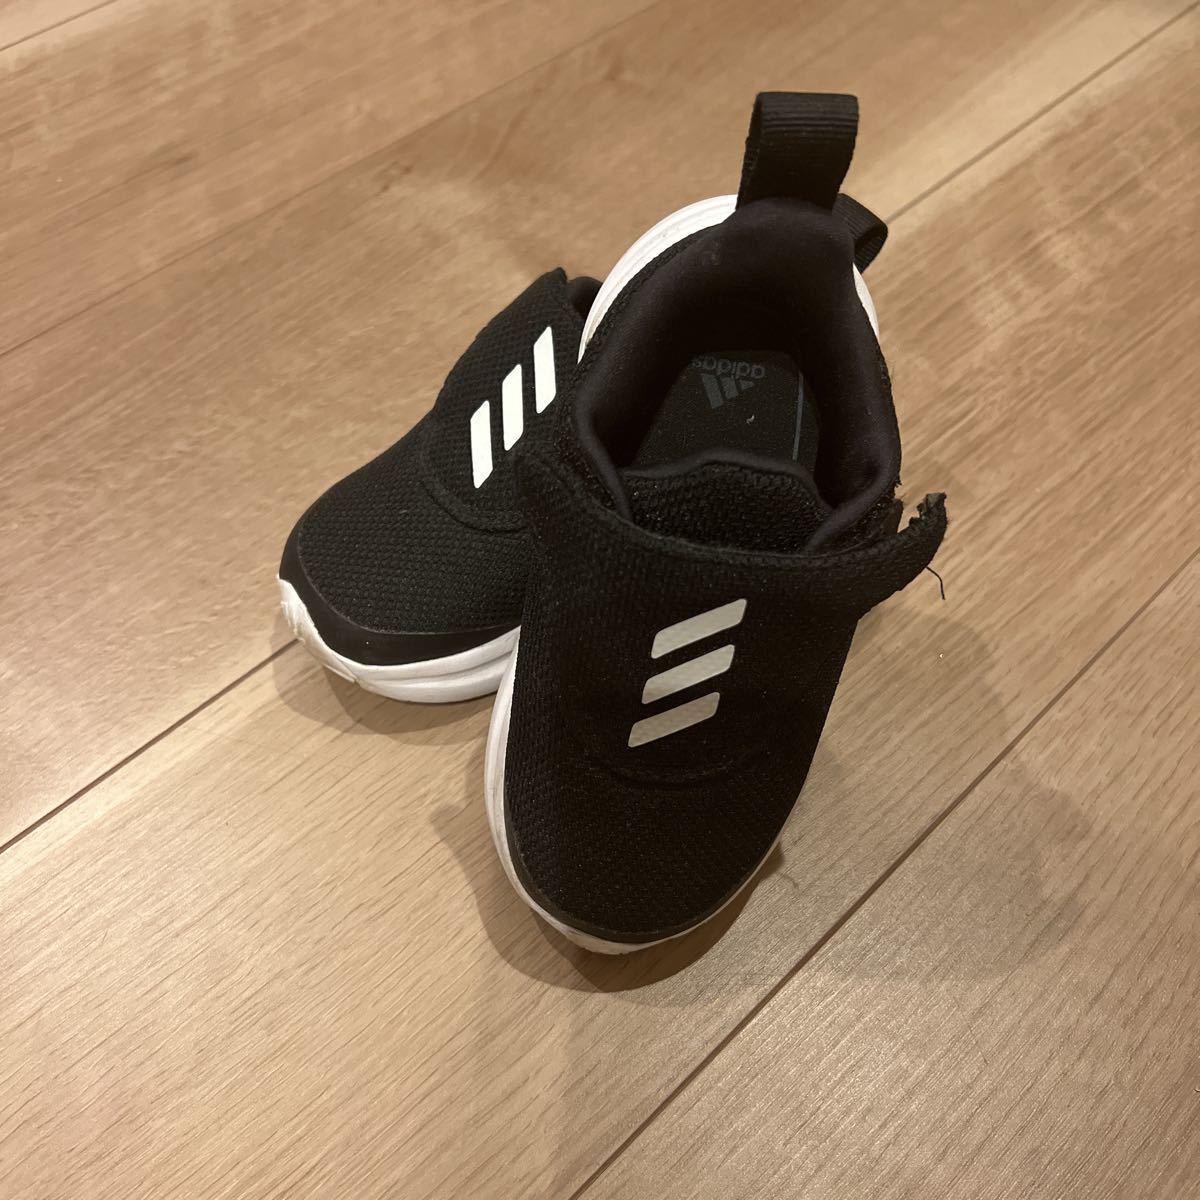  once only have on Adidas Kids sneakers child 13 centimeter 13.0 baby adidas man girl 